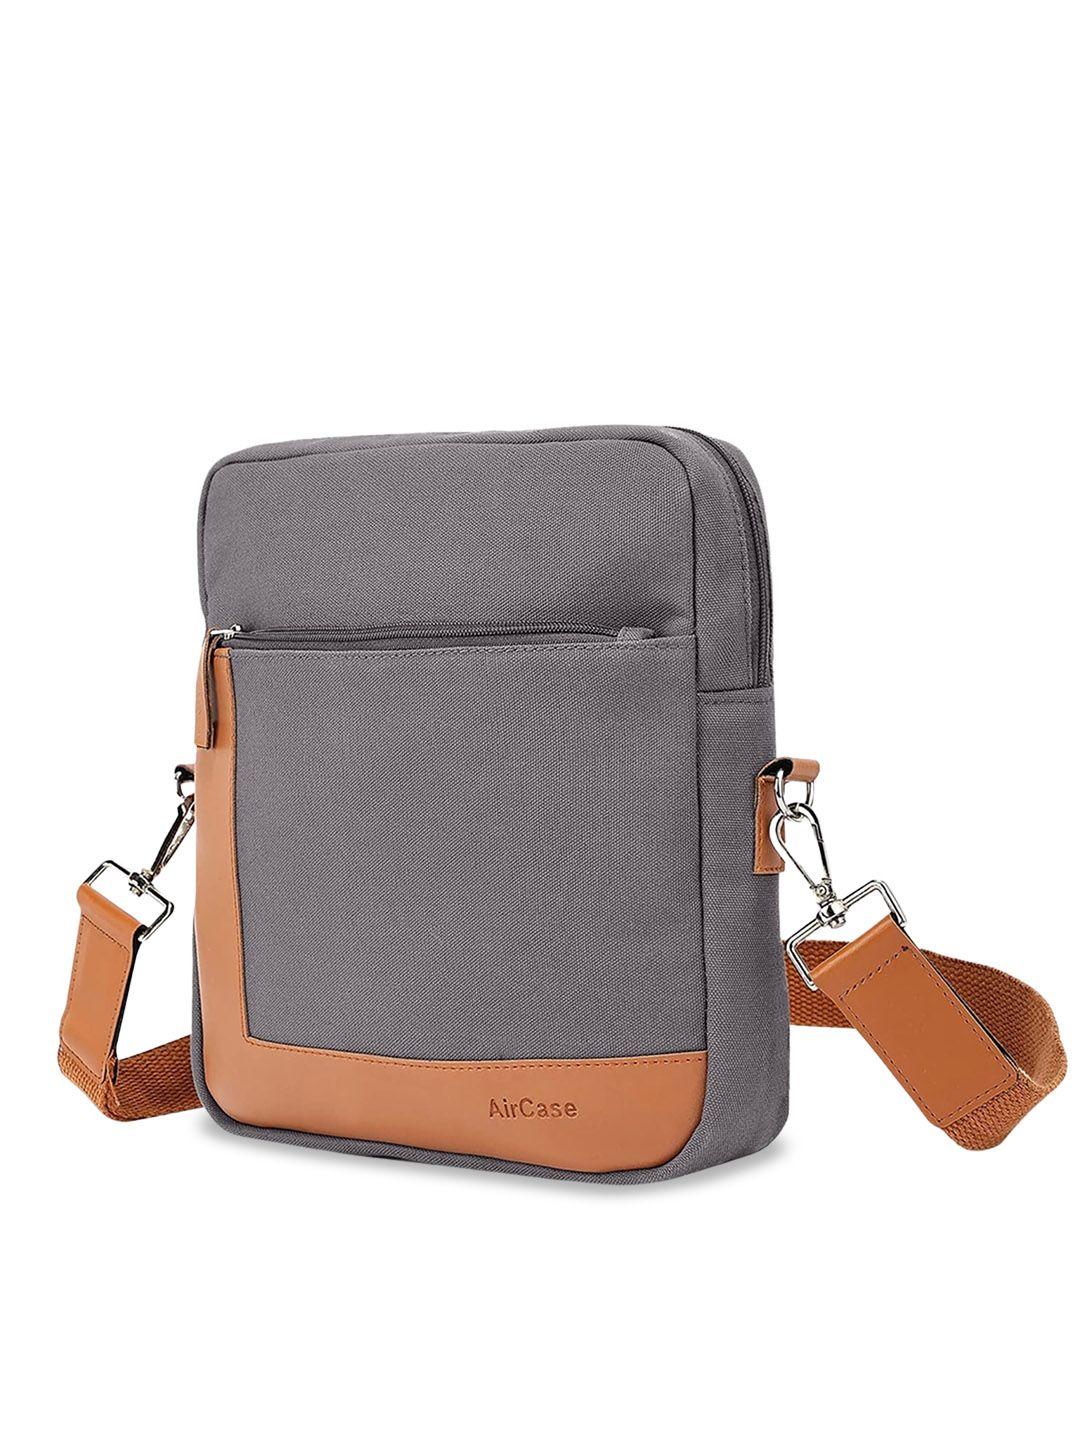 aircase structured sling bag